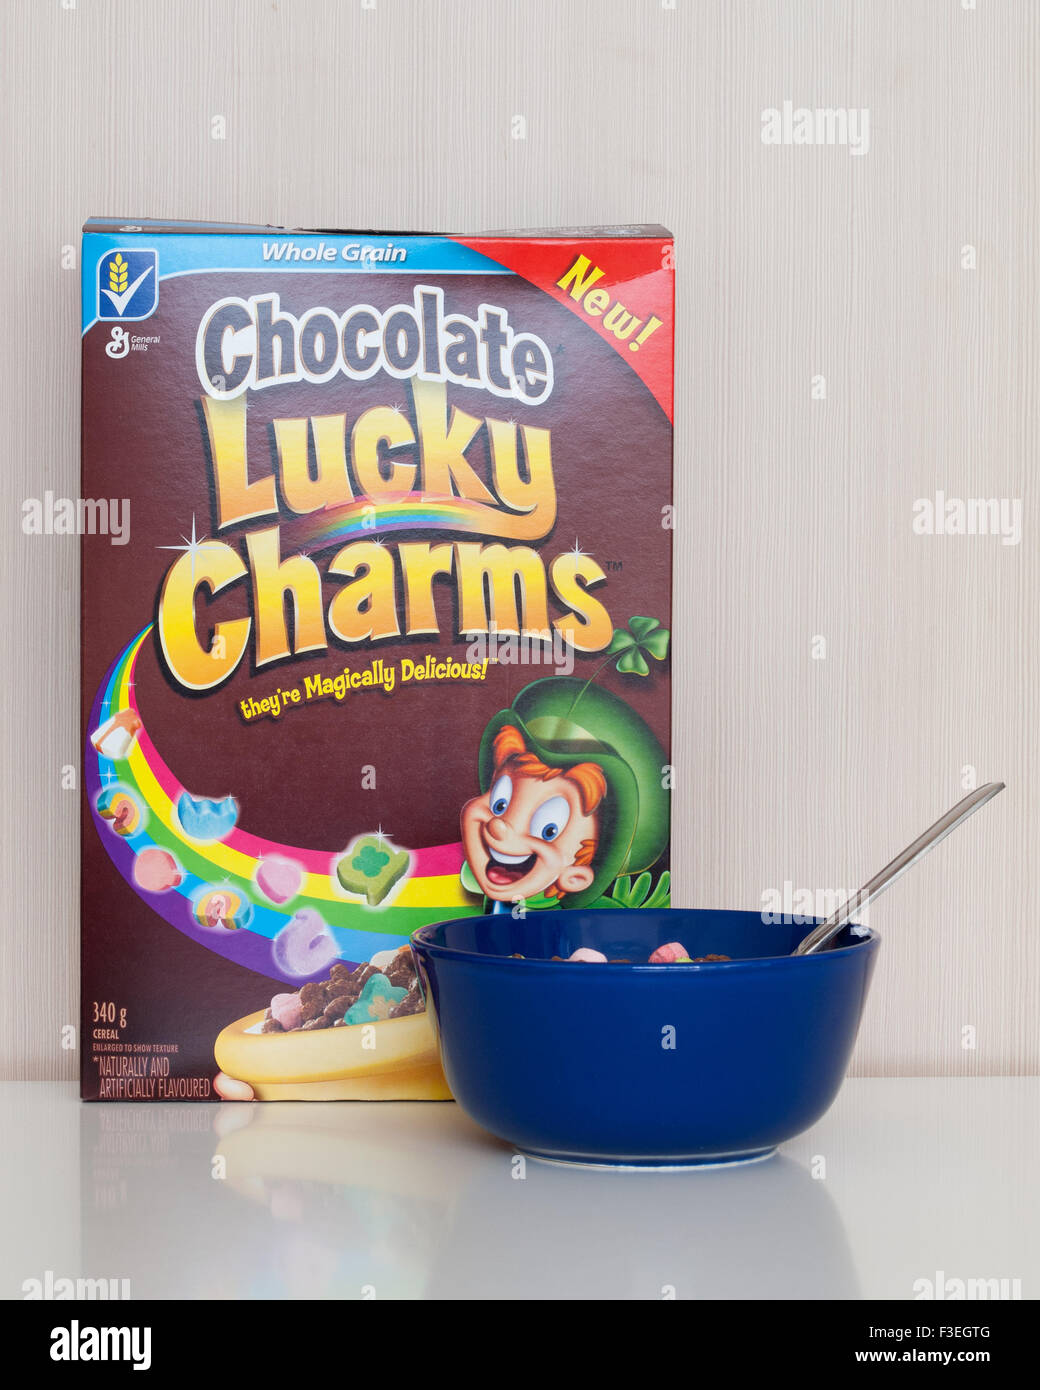 A box and bowl of Chocolate Lucky Charms cereal, manufactured by General Mills. Stock Photo